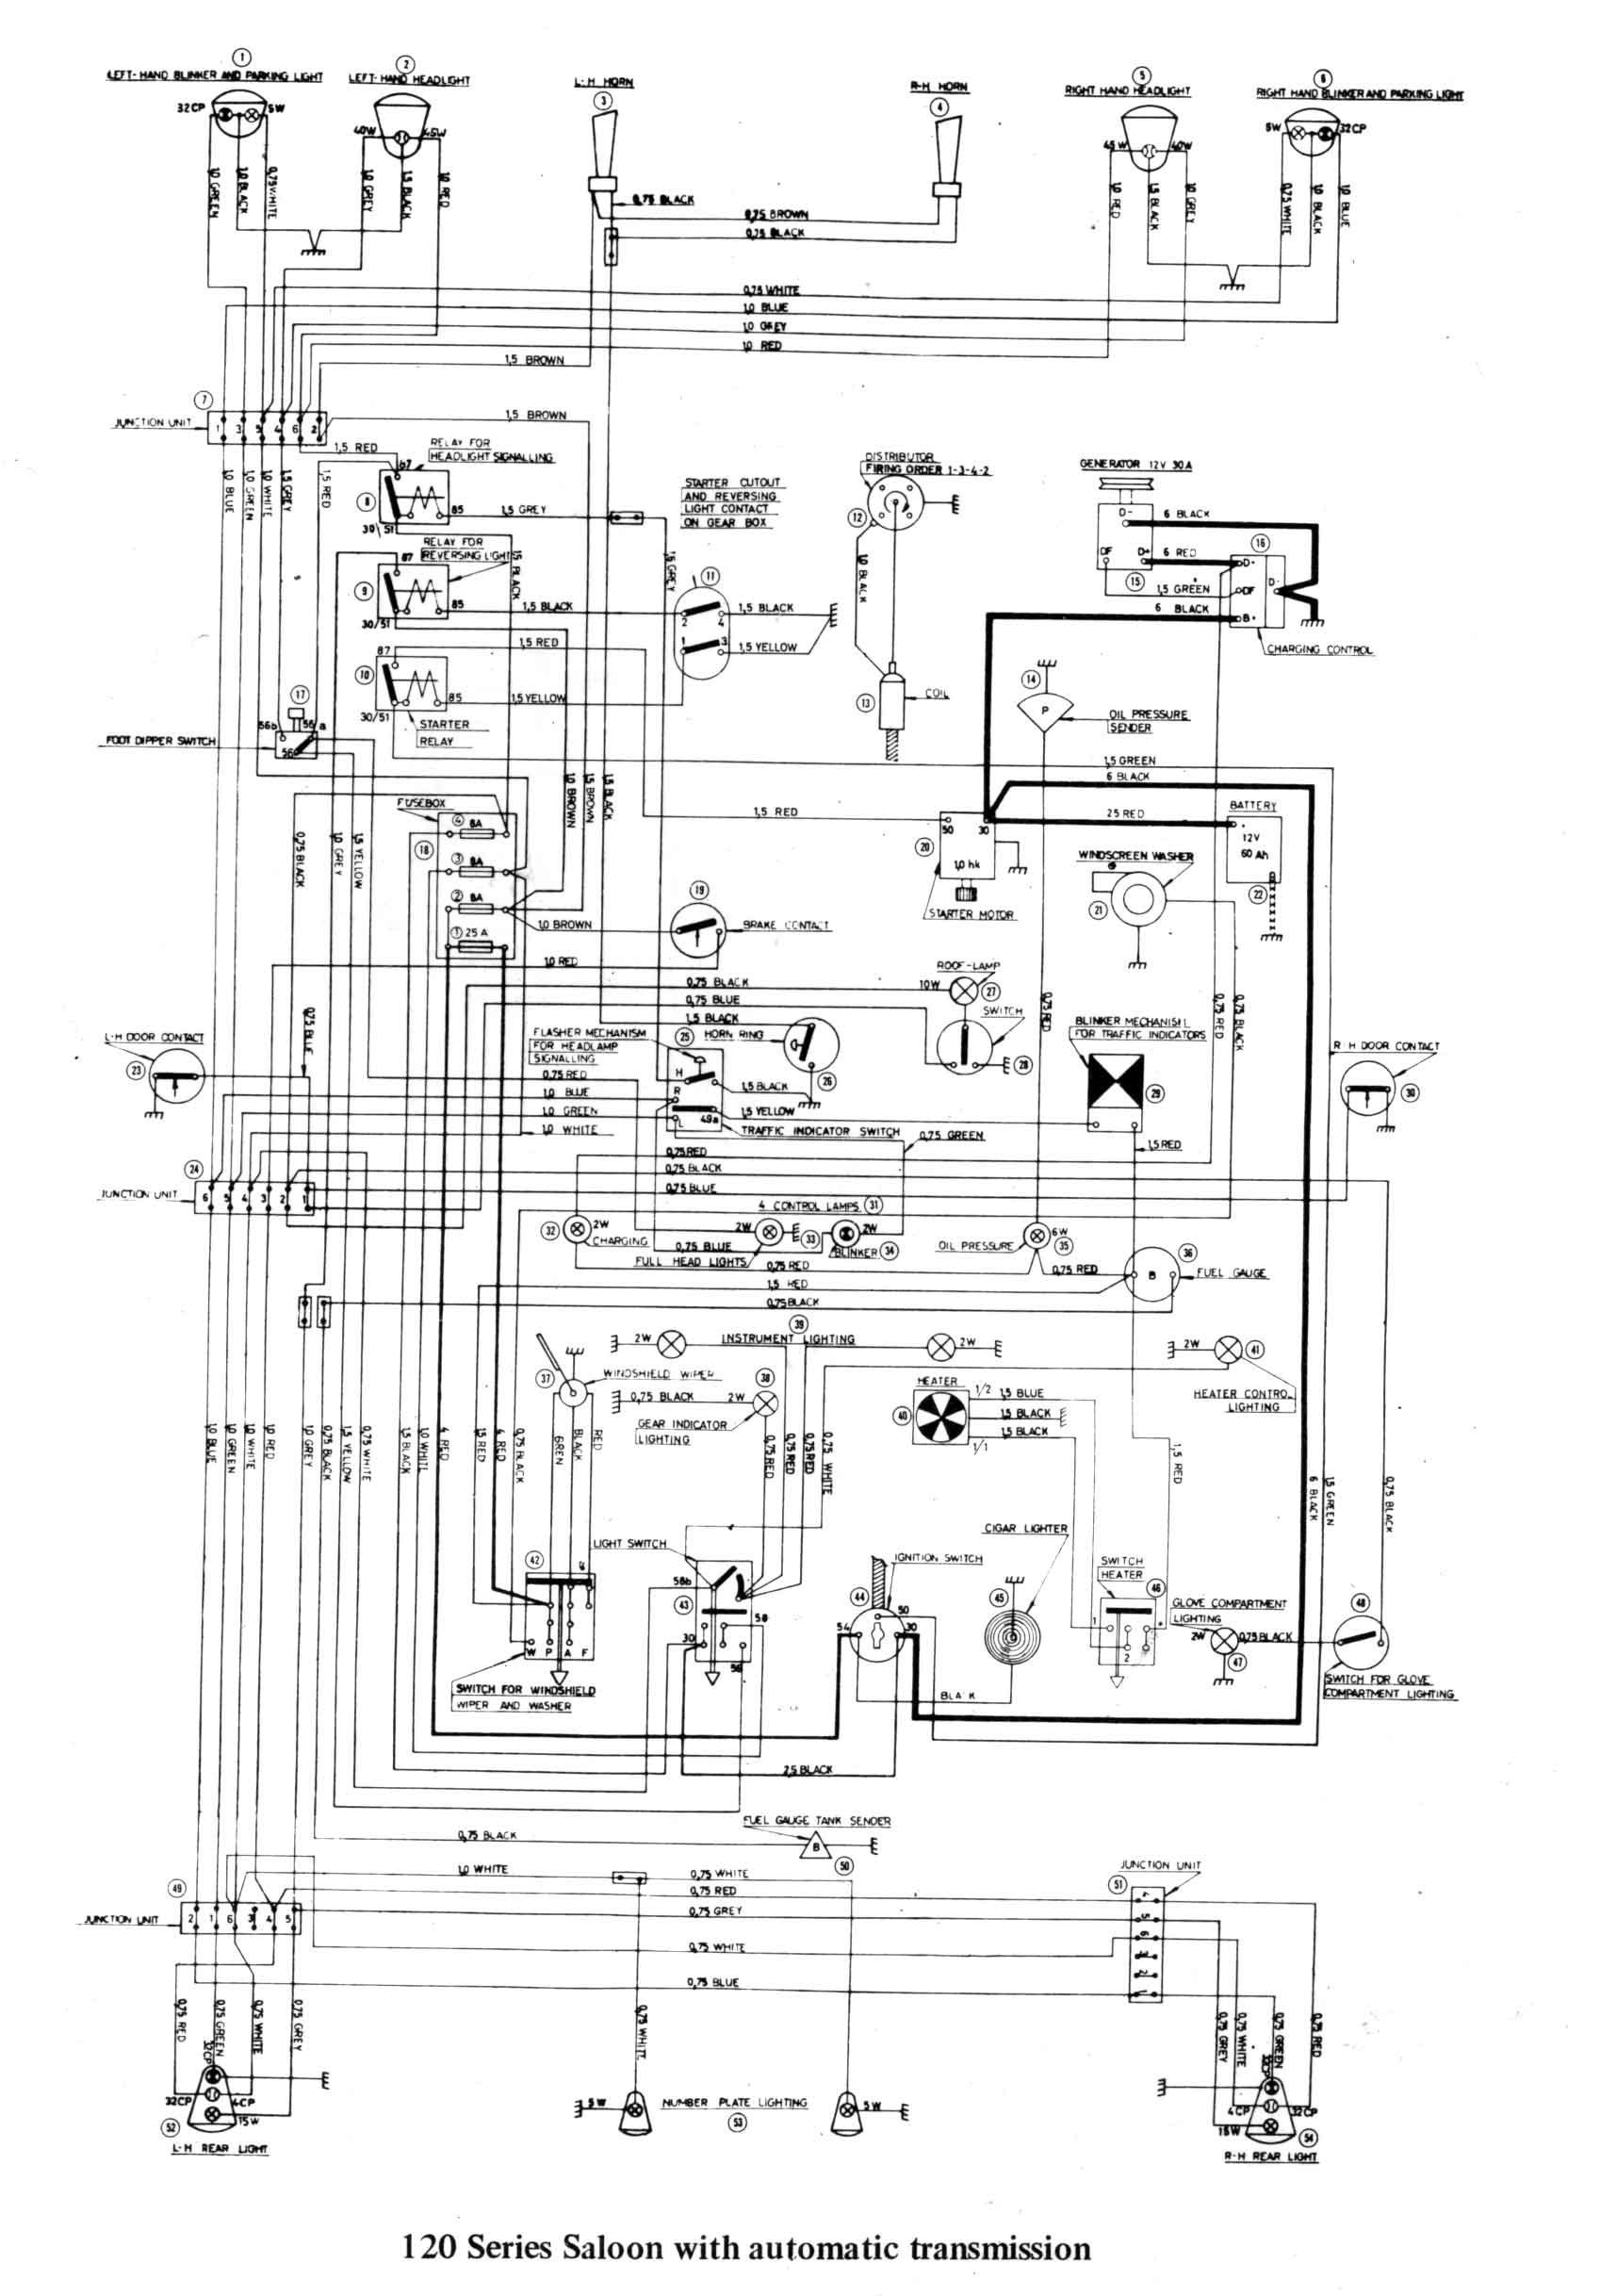 Electrical Connection Diagram Best Electrical Wiring Diagram Lovely Sw Em Od Retrofitting A Vintage